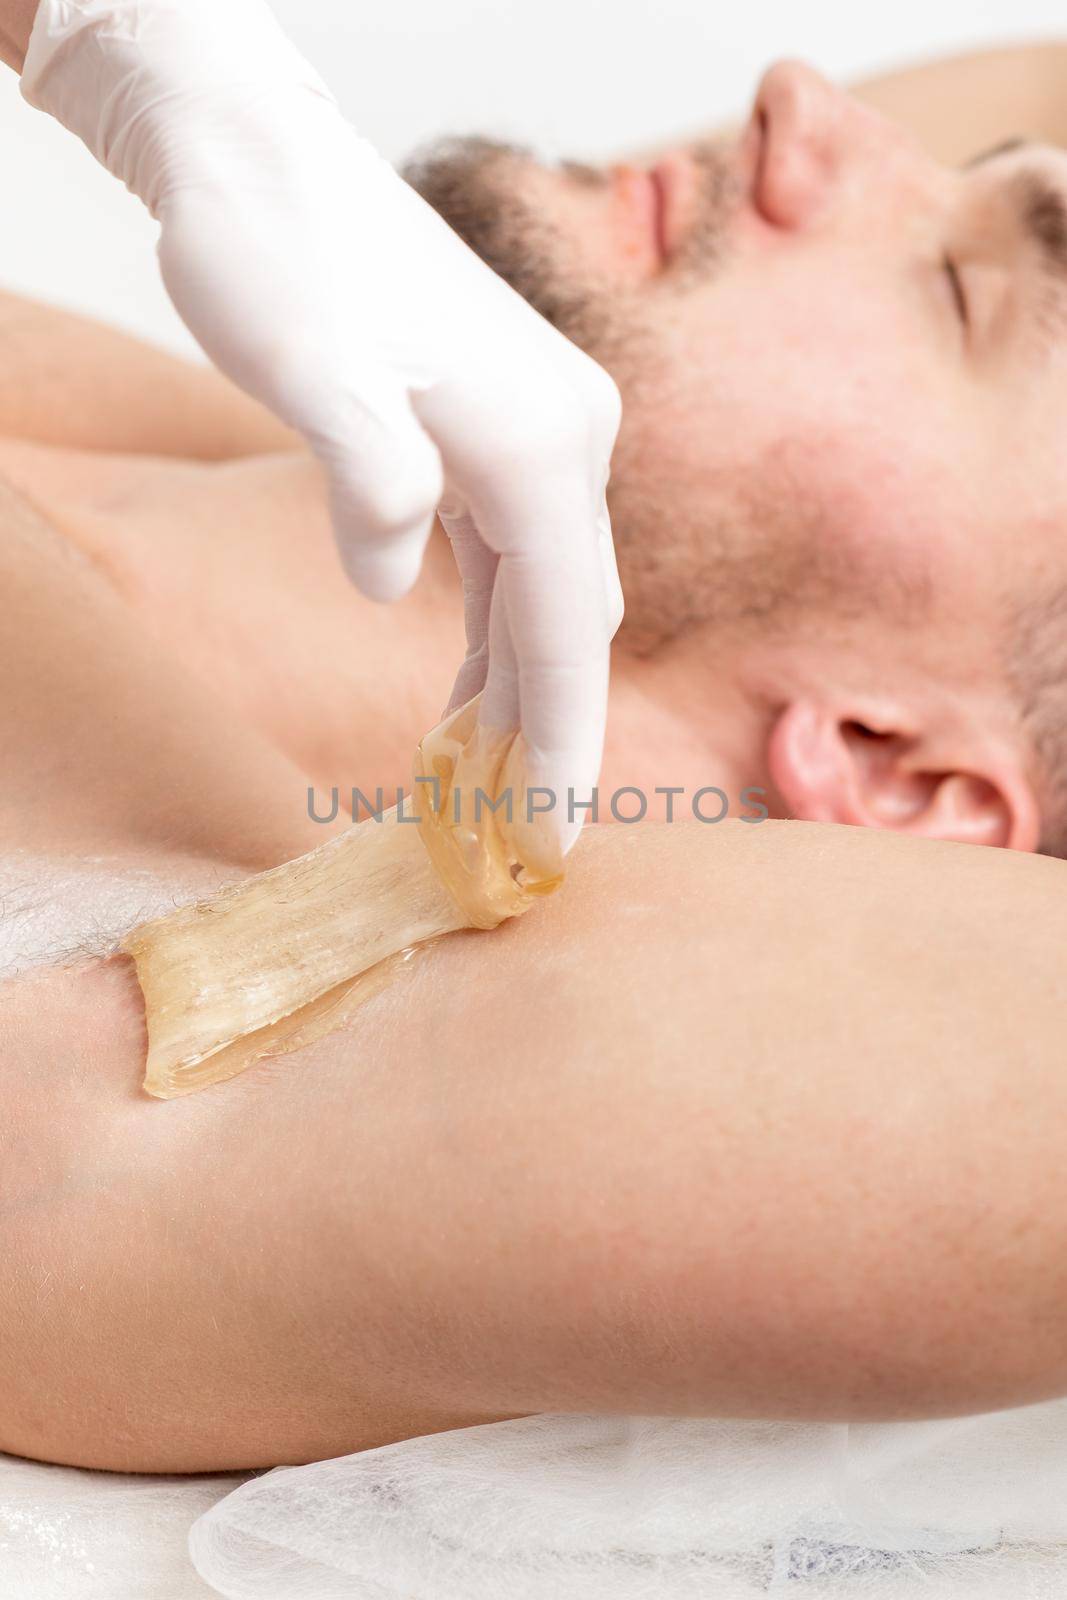 Depilation and epilation male armpit with liquid sugar paste. Hand of cosmetologist applying wax paste on armpit of man. Smooth underarm concept